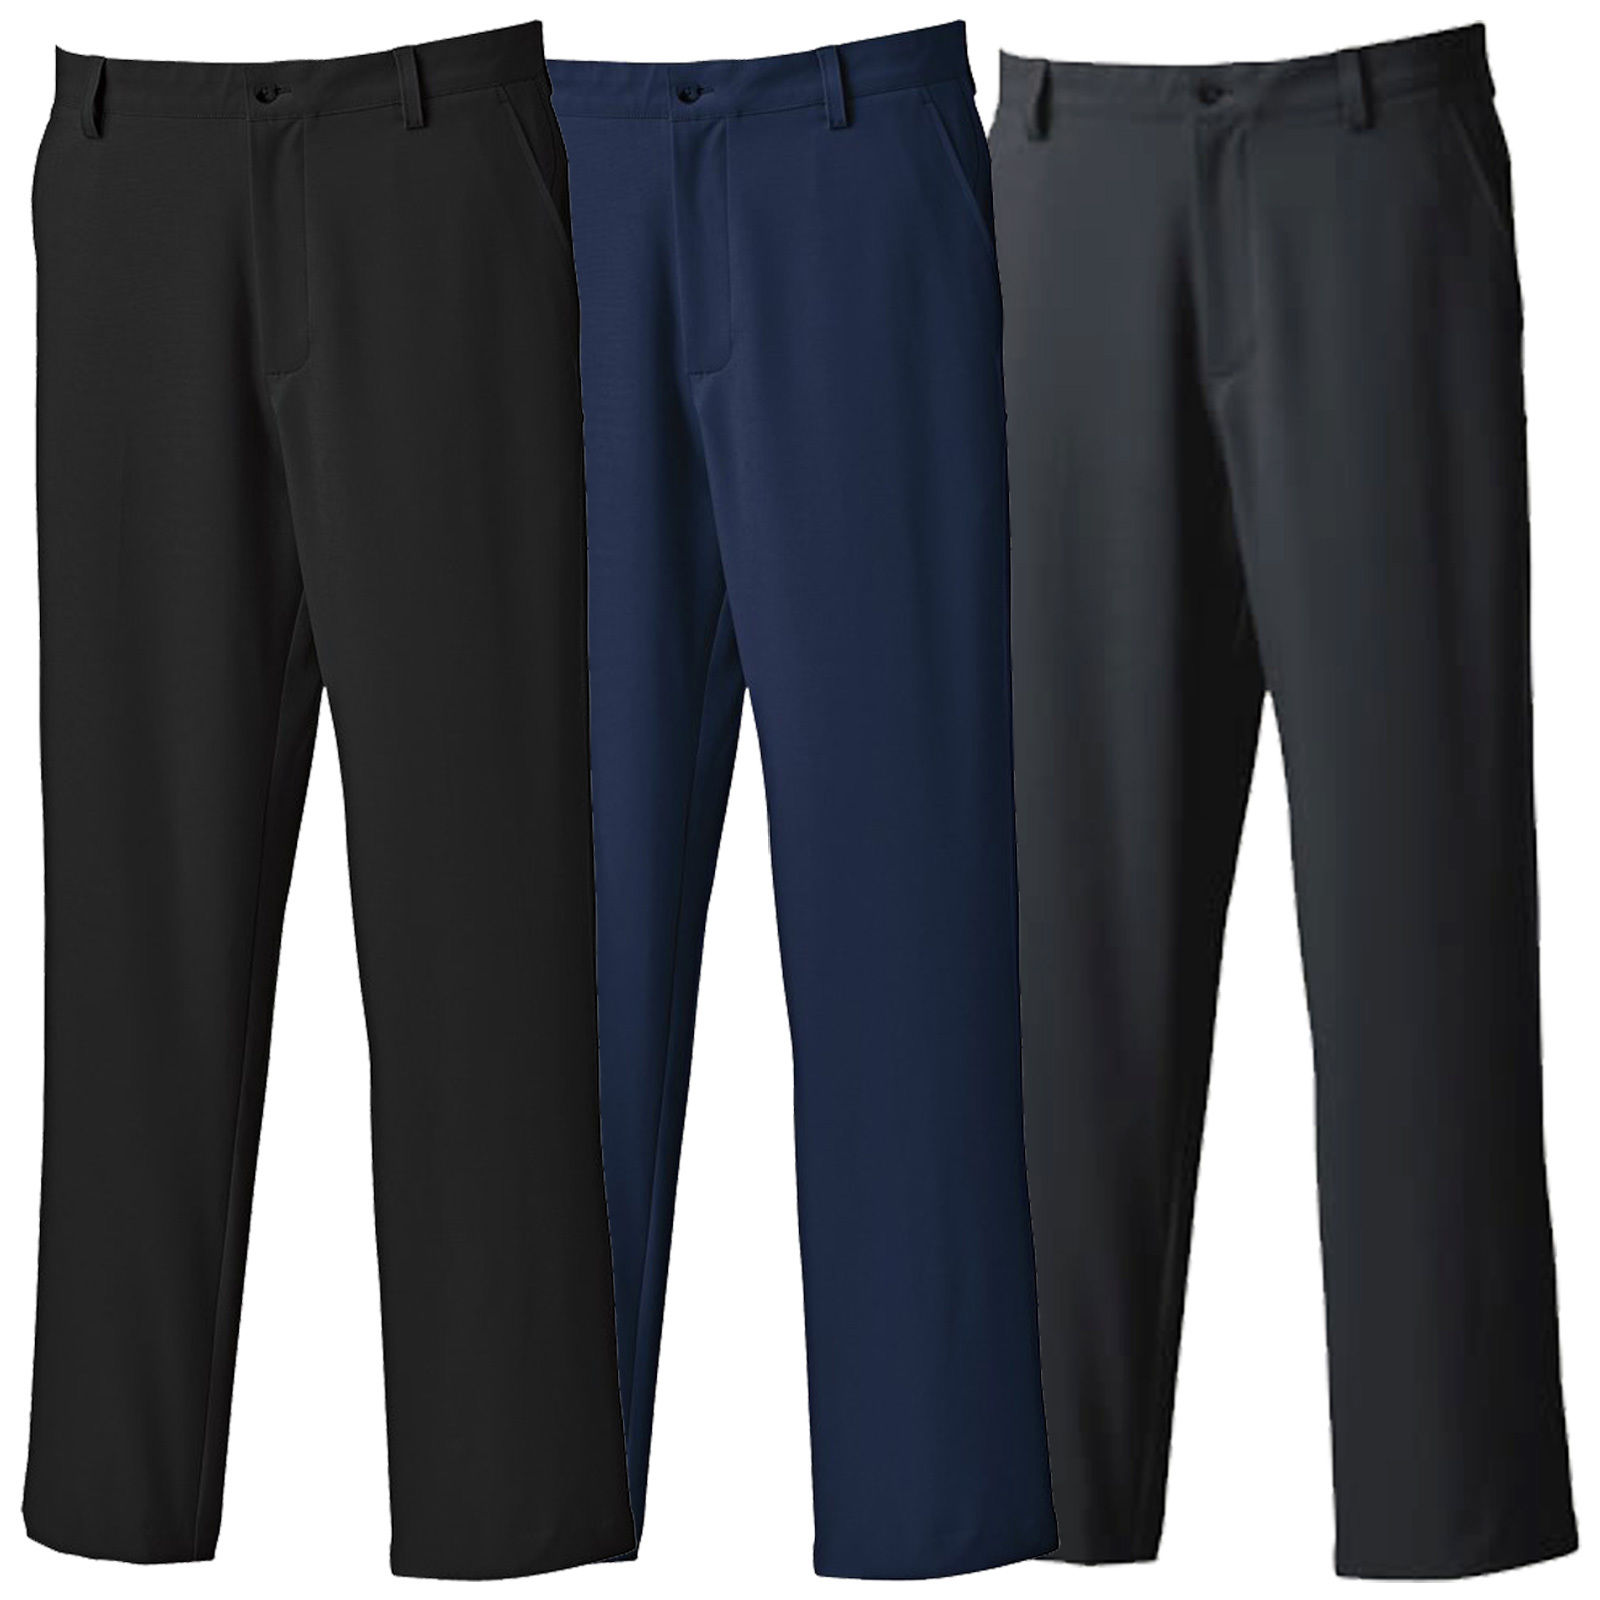 FOOTJOY MENS CLASSIC GOLF TROUSERS - NEW ESSENTIAL PERFORMANCE STRAIGHT